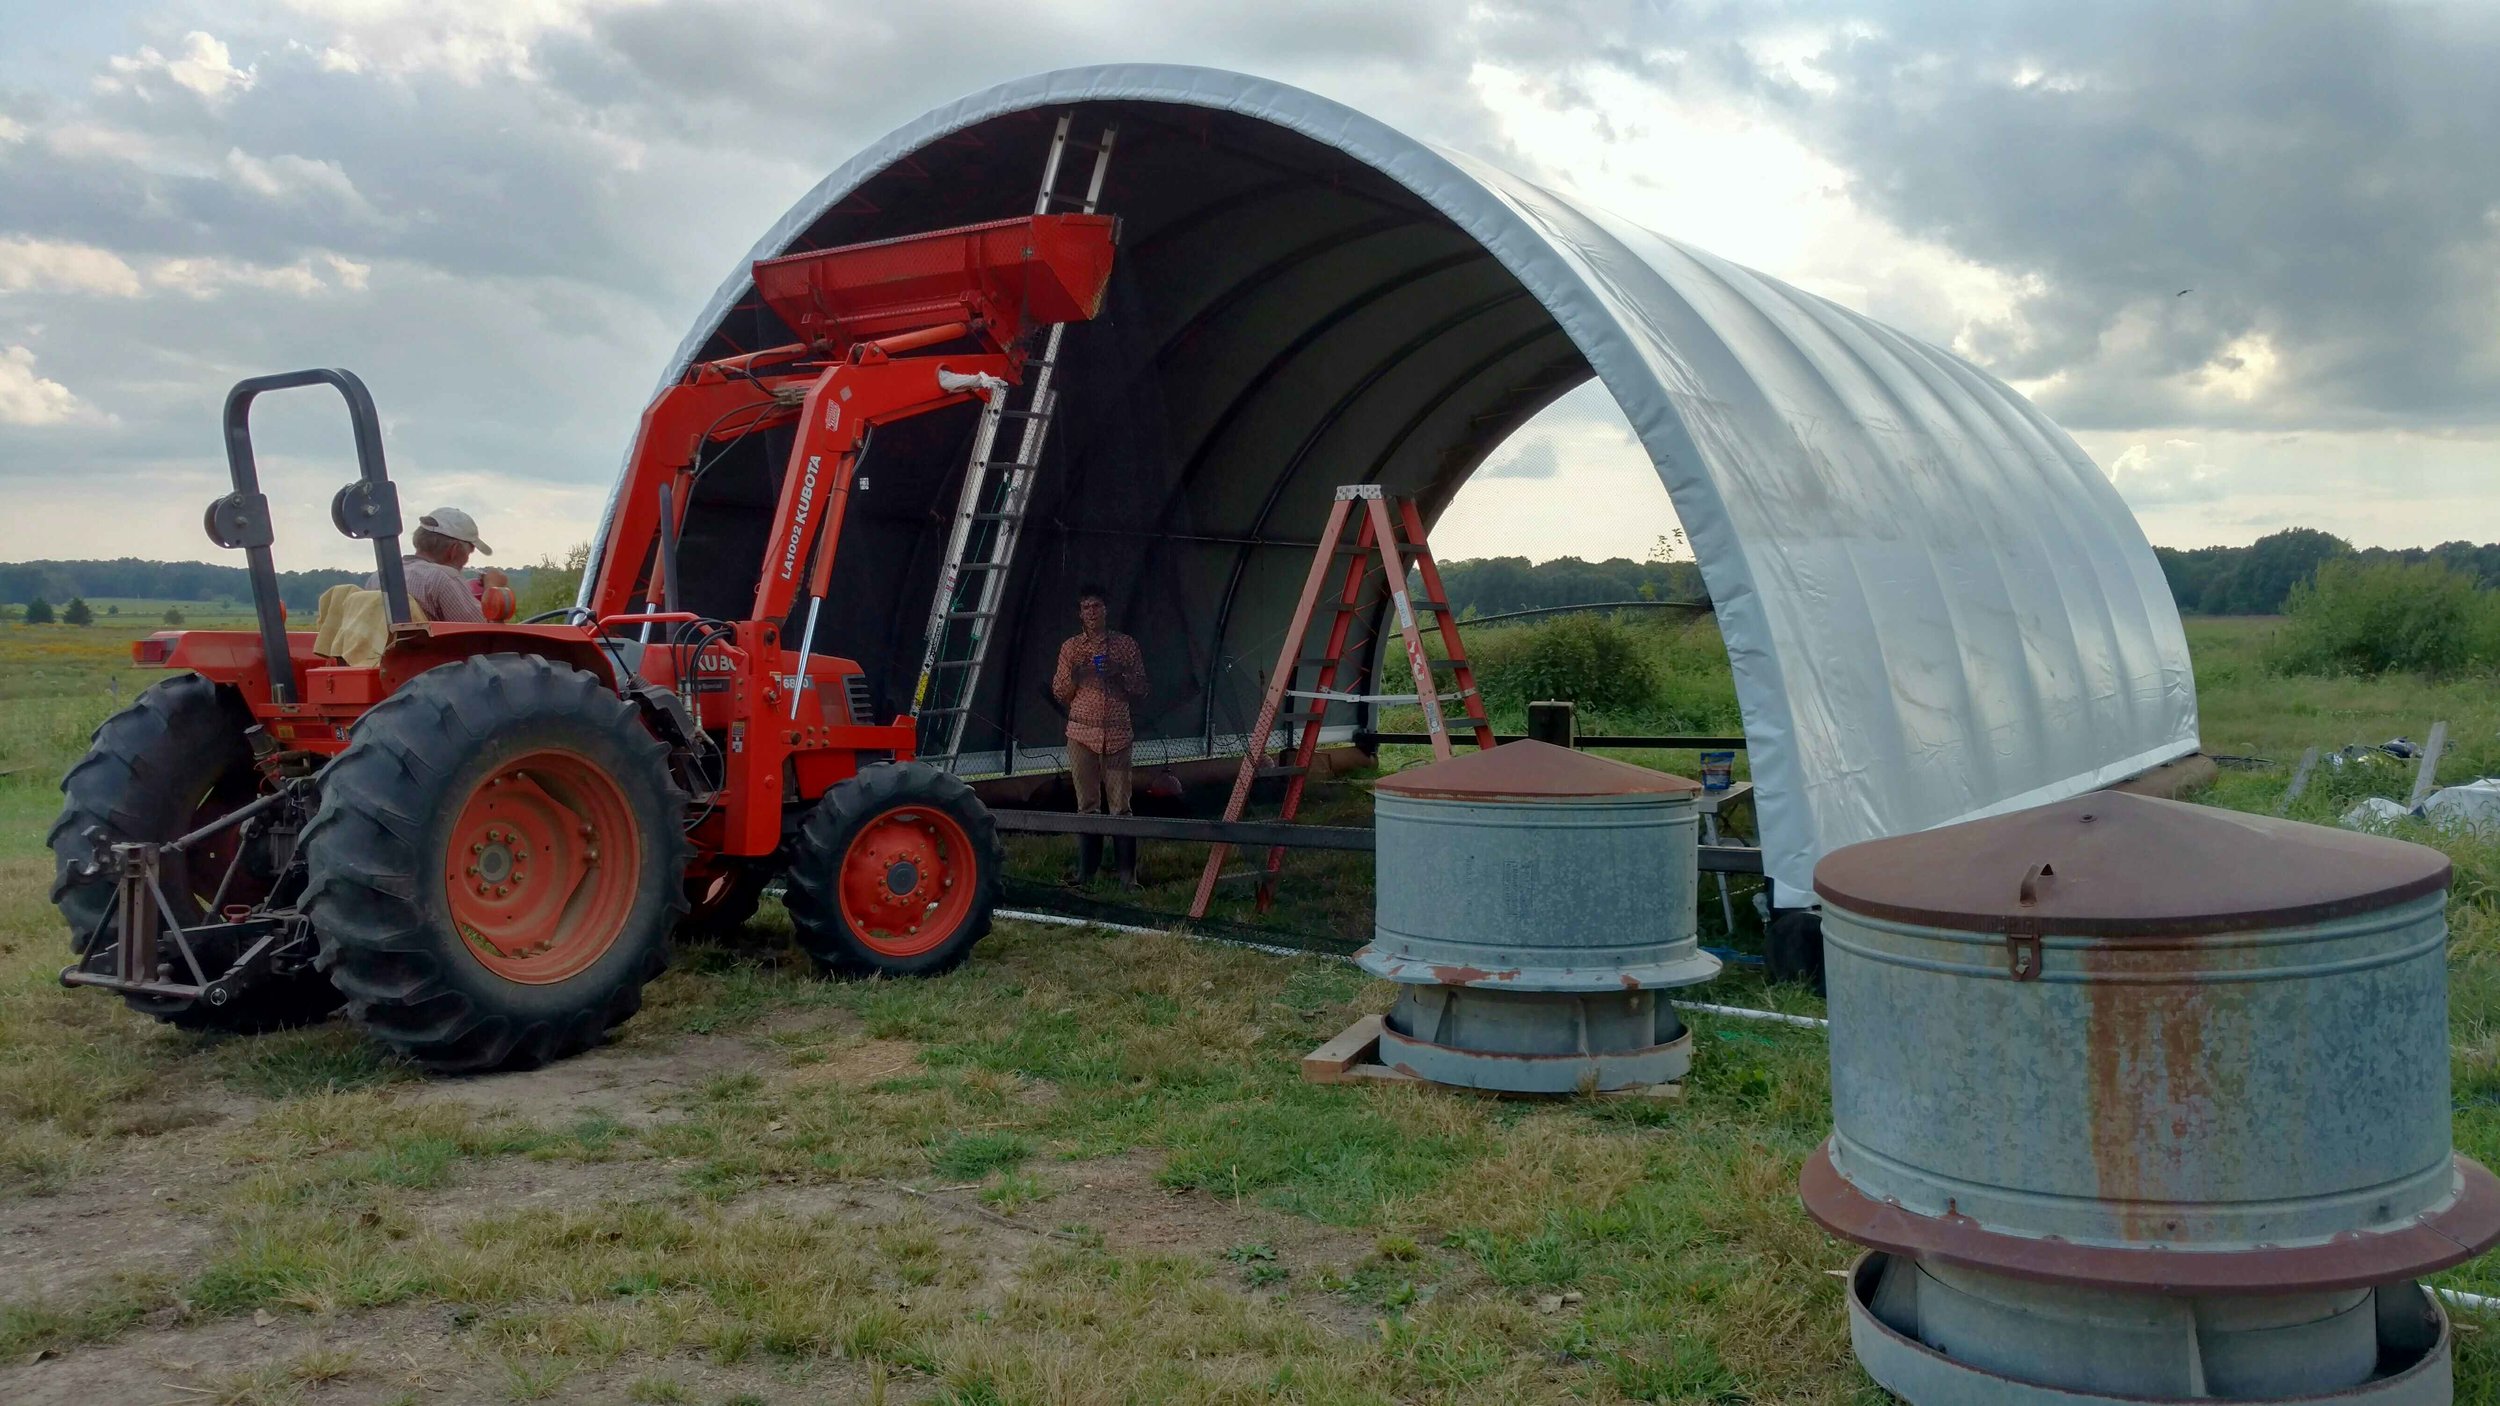 Final touches on hoop house.